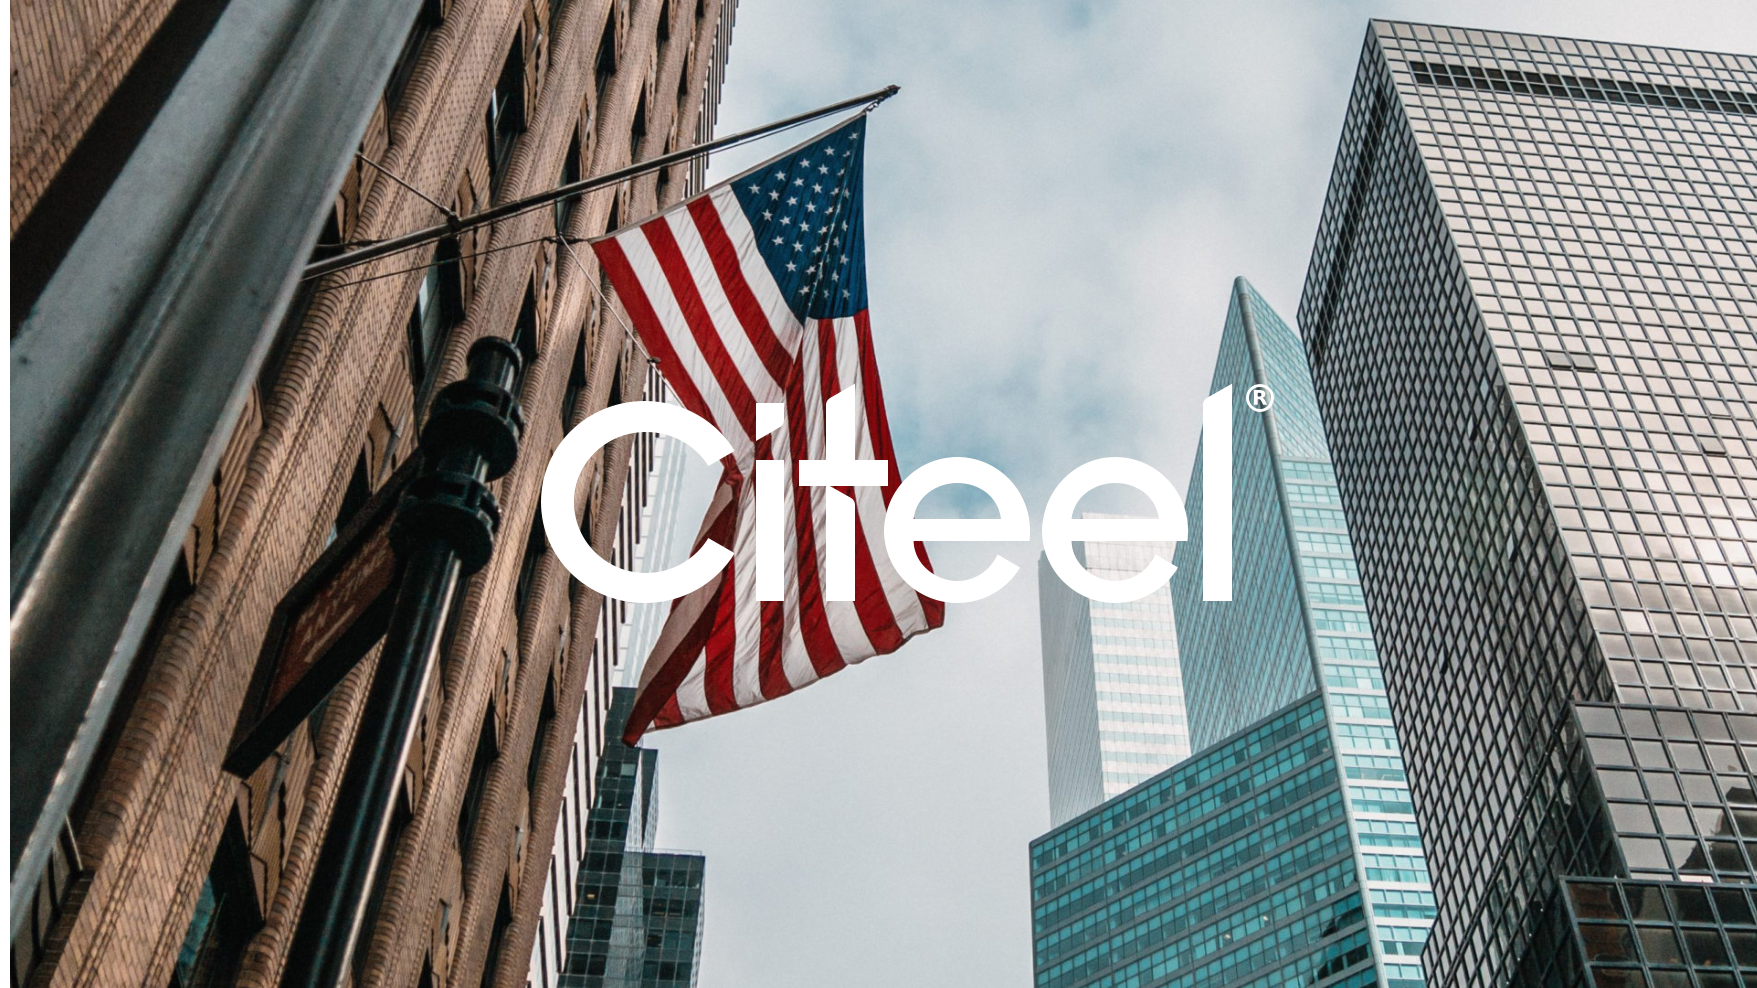 Citeel moves ahead with US expansion